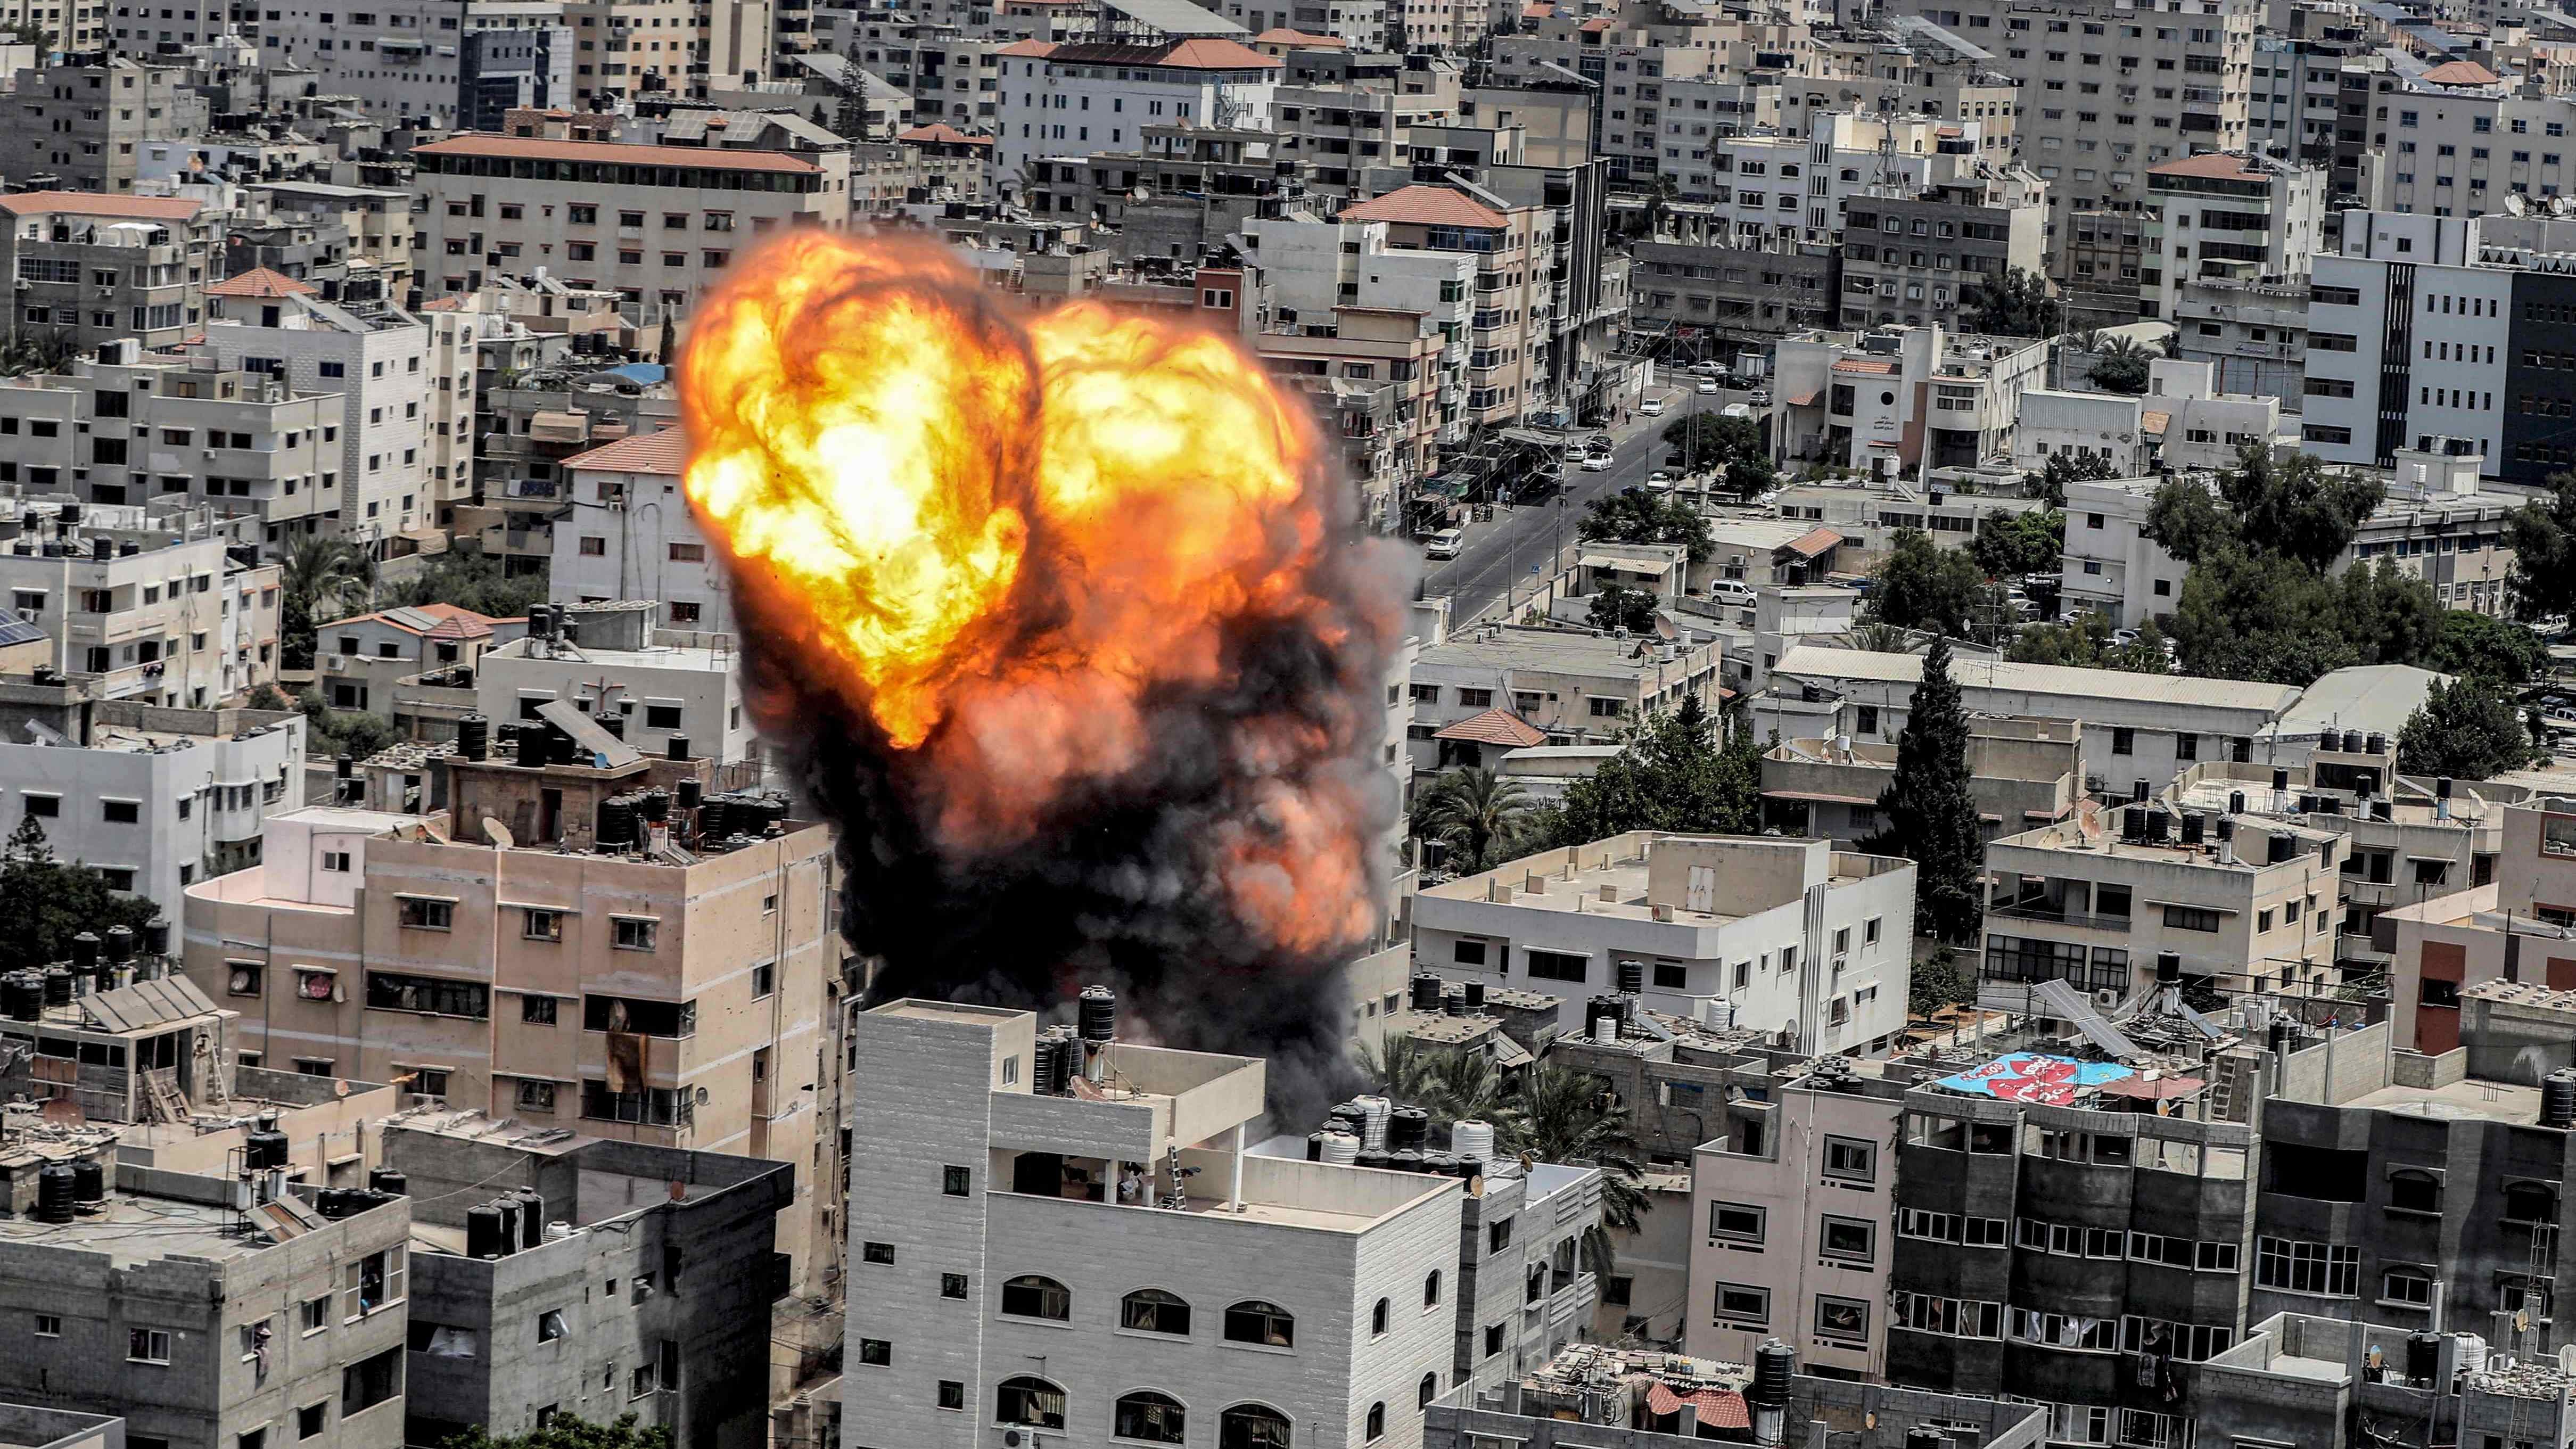 A fireball erupts as a result of an Israeli air strike on a building in Gaza City. Credit: AFP Photo